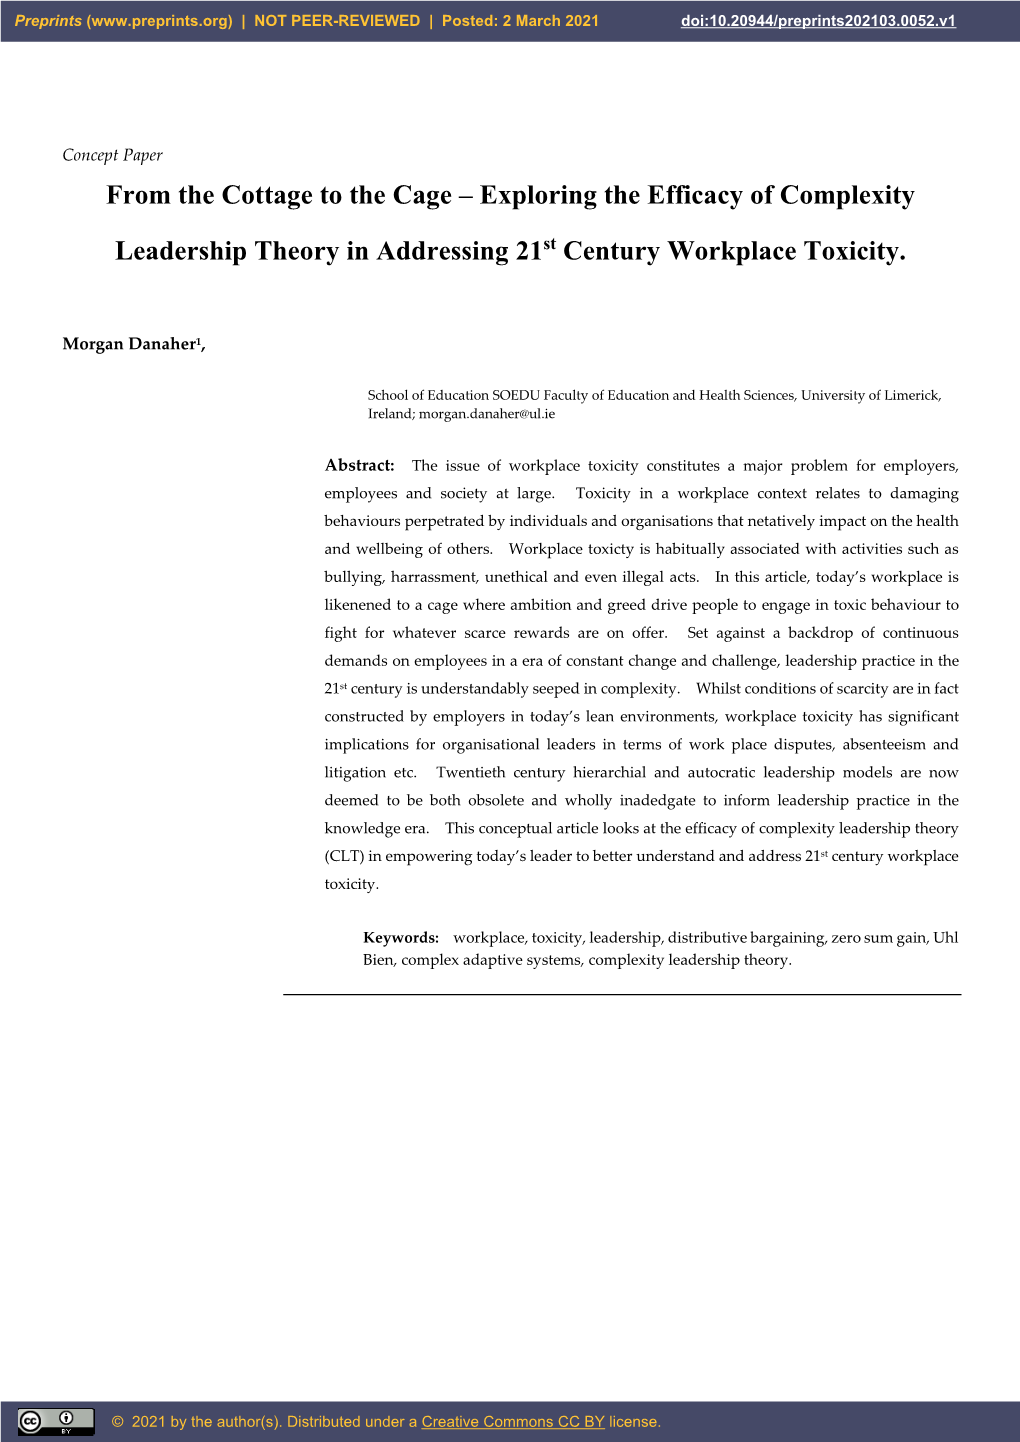 Exploring the Efficacy of Complexity Leadership Theory in Addressing